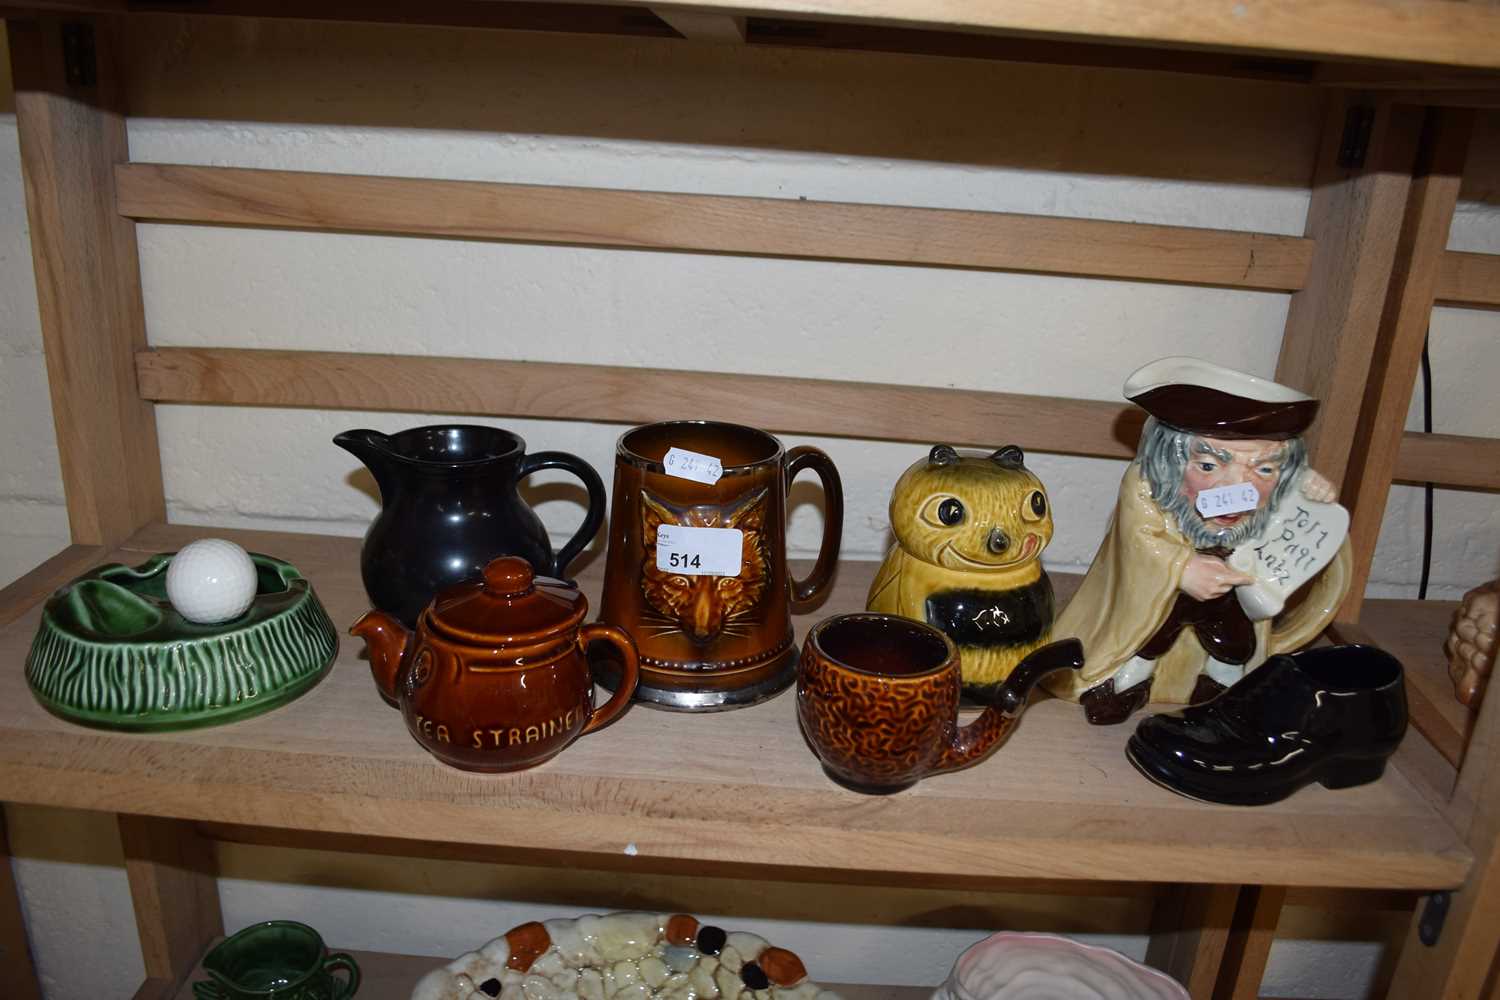 COLLECTION OF VARIOUS SYLVAC JUGS, MUGS AND OTHER NOVELTY ITEMS